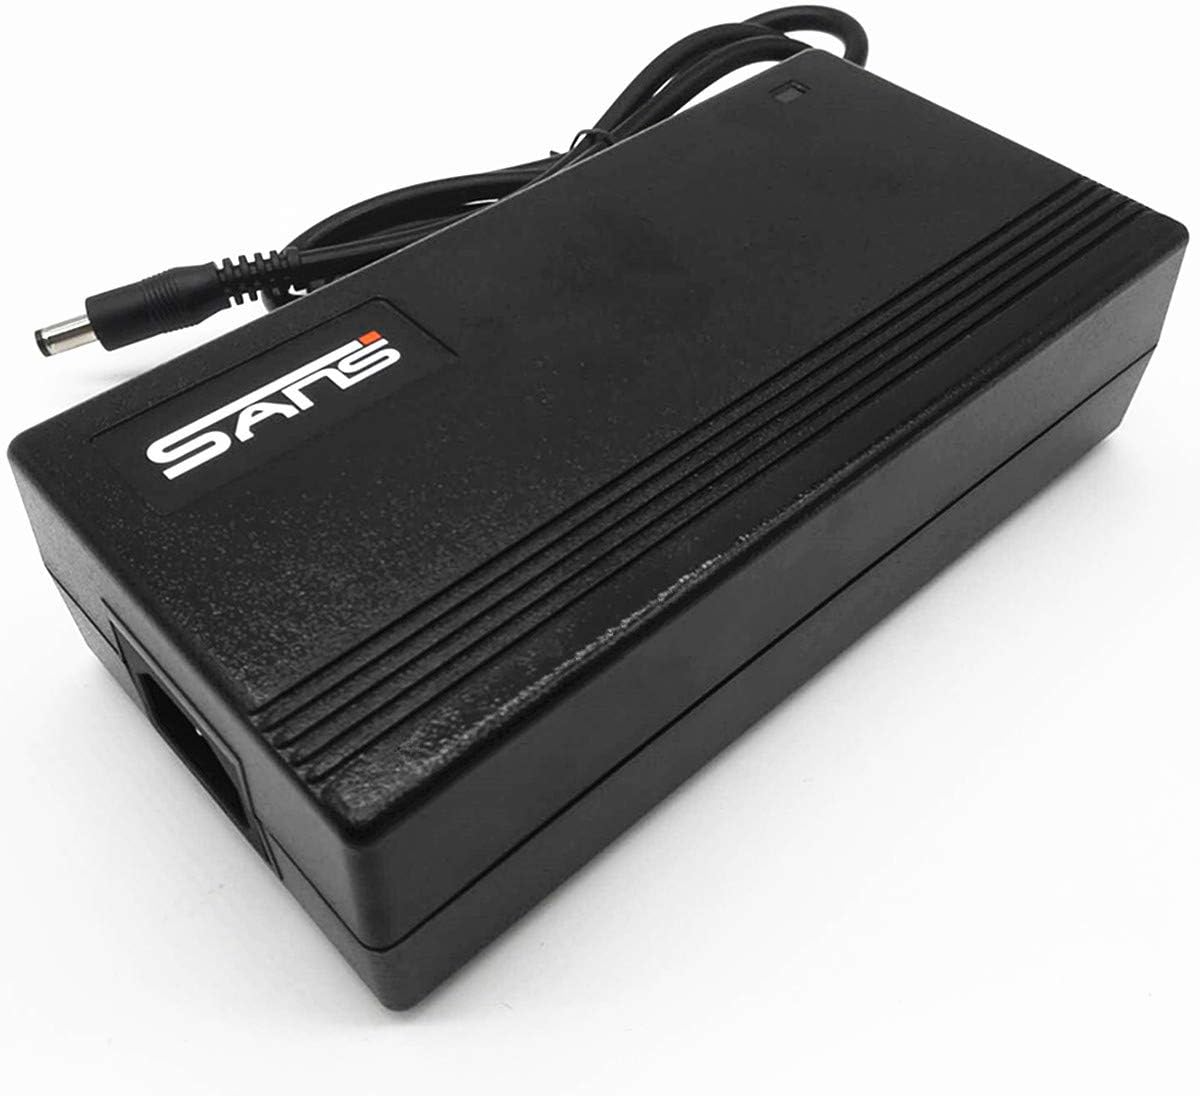 A black SANS power supply with a power cord attached to it, suitable for an electric scooter.